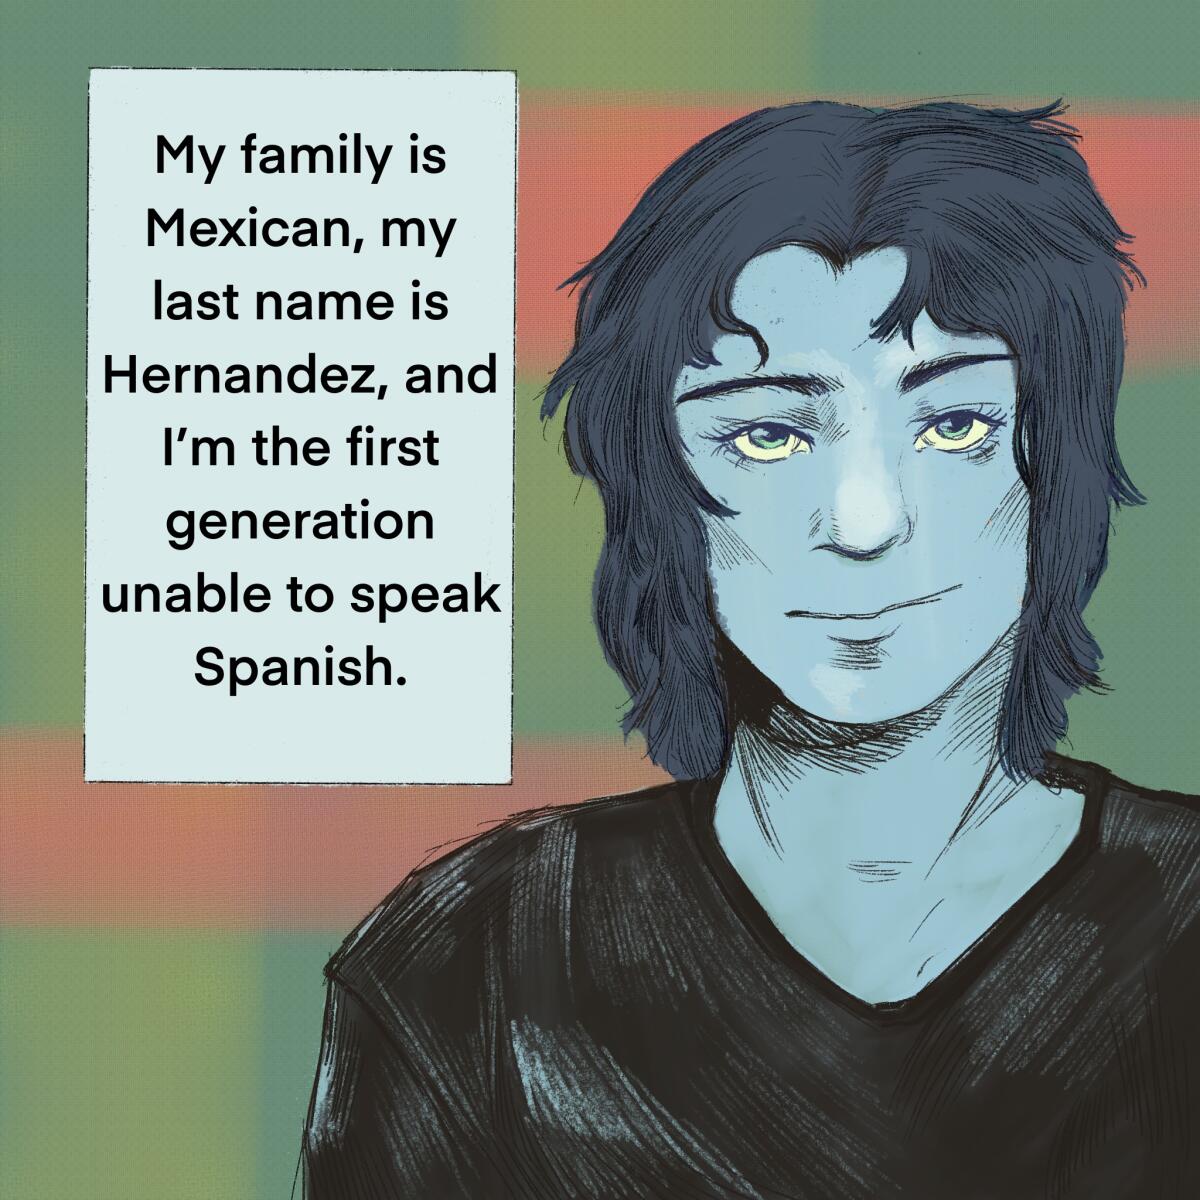 My family is Mexican, my last name is Hernandez, and I'm the first generation unable to speak Spanish.